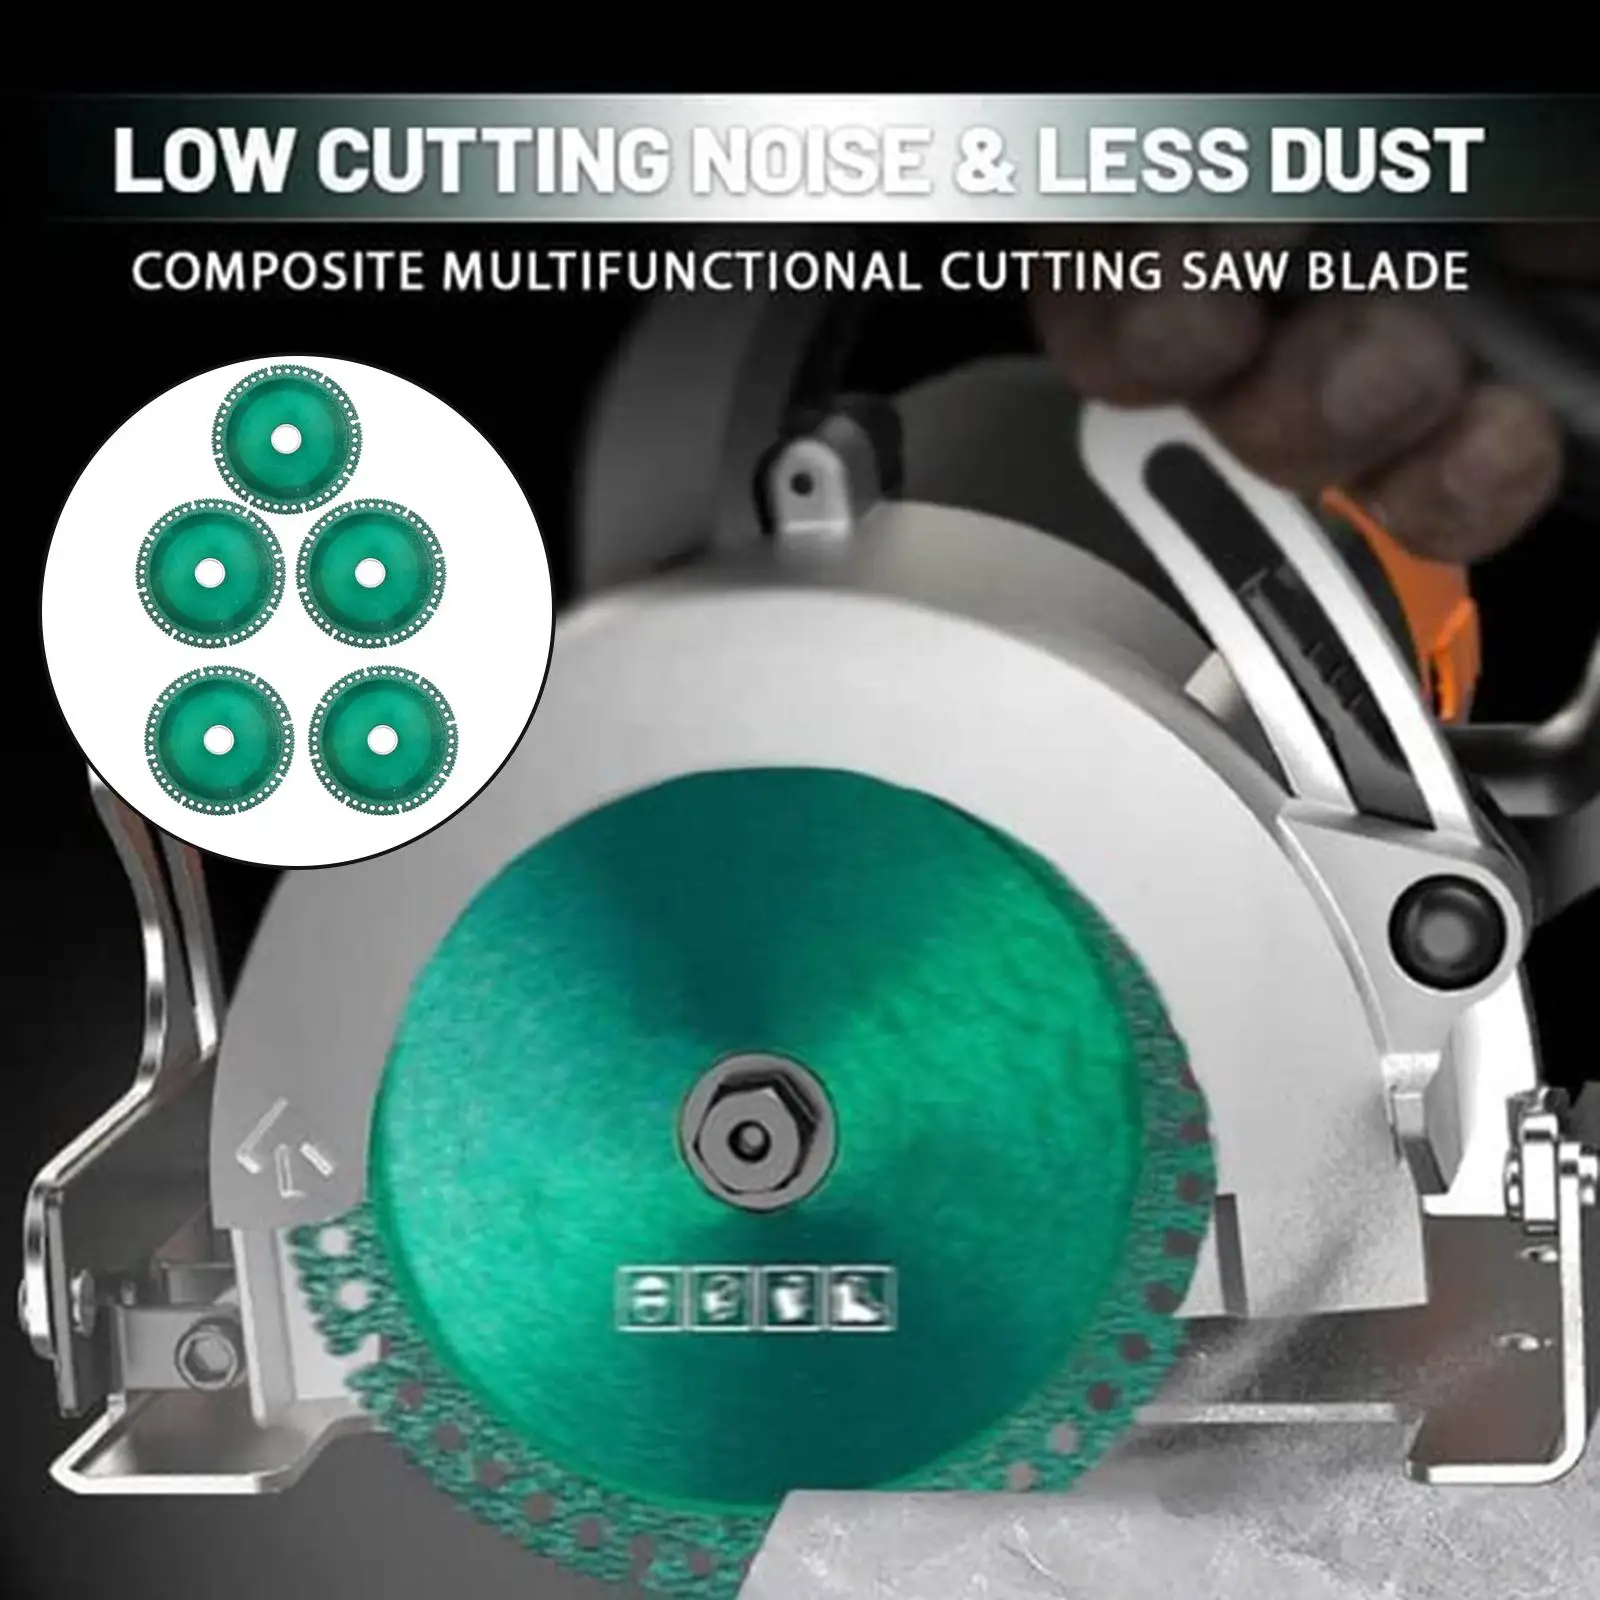 5Pcs Diamond Saw Blade 4in Ultra-Thin Composite Multifunctional Cutting Saw Blade For Angle Grinder Cutting Tool